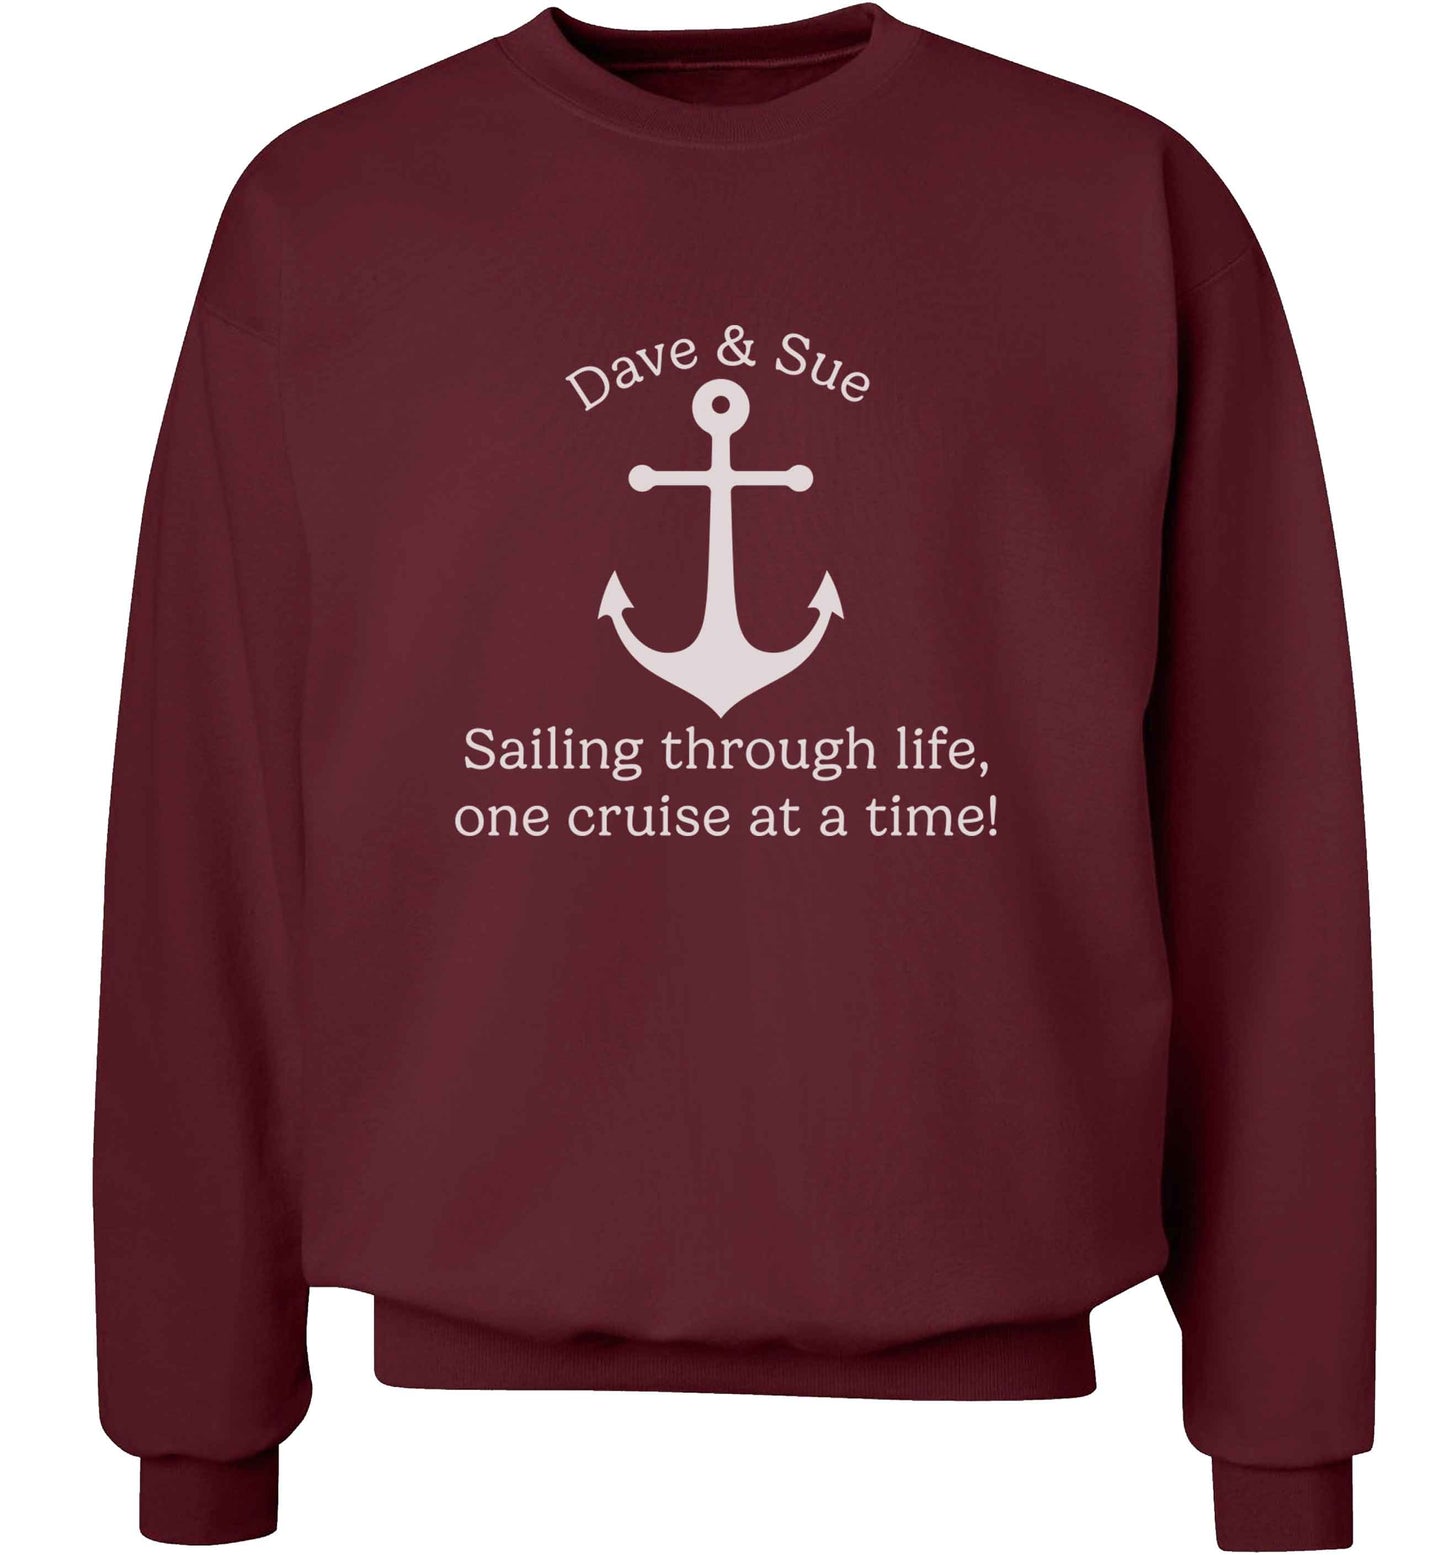 Sailing through life one cruise at a time - personalised adult's unisex maroon sweater 2XL